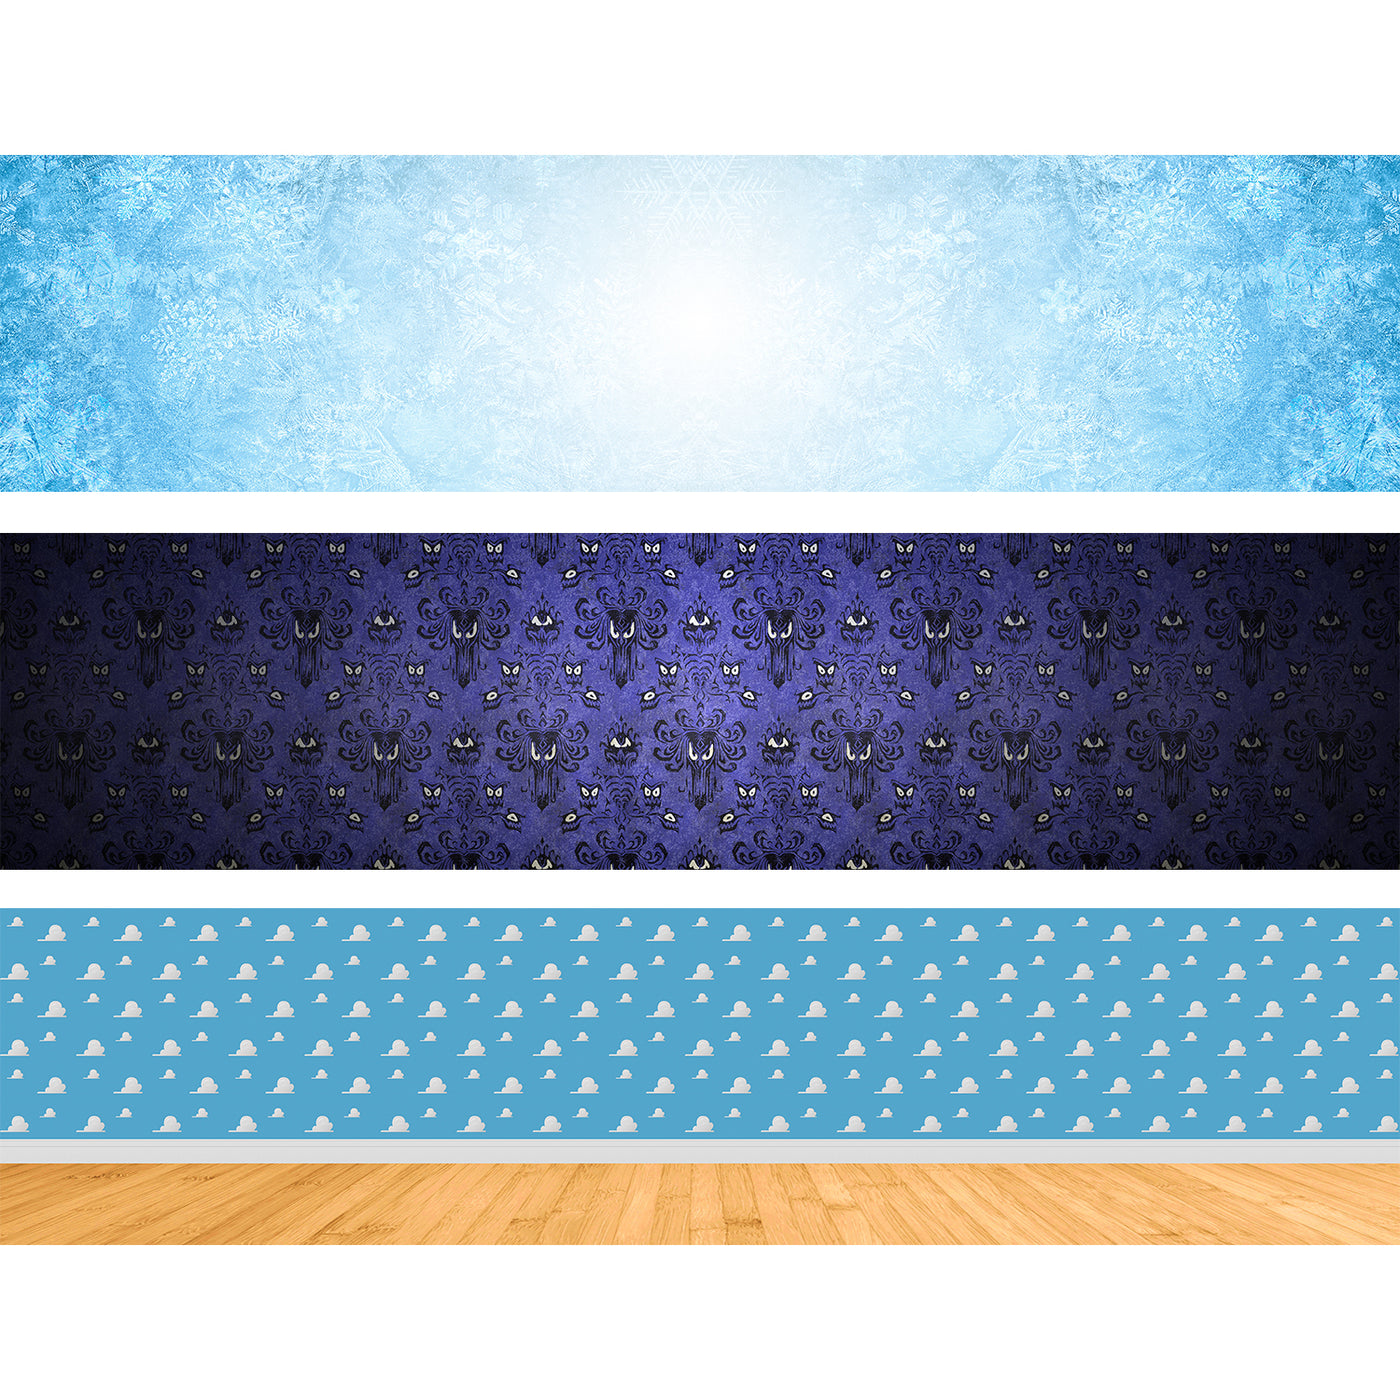 DISNEY - Backdrop Inserts for CLASSIC Display Geek Shelves (Limited Edition) - Display Geek